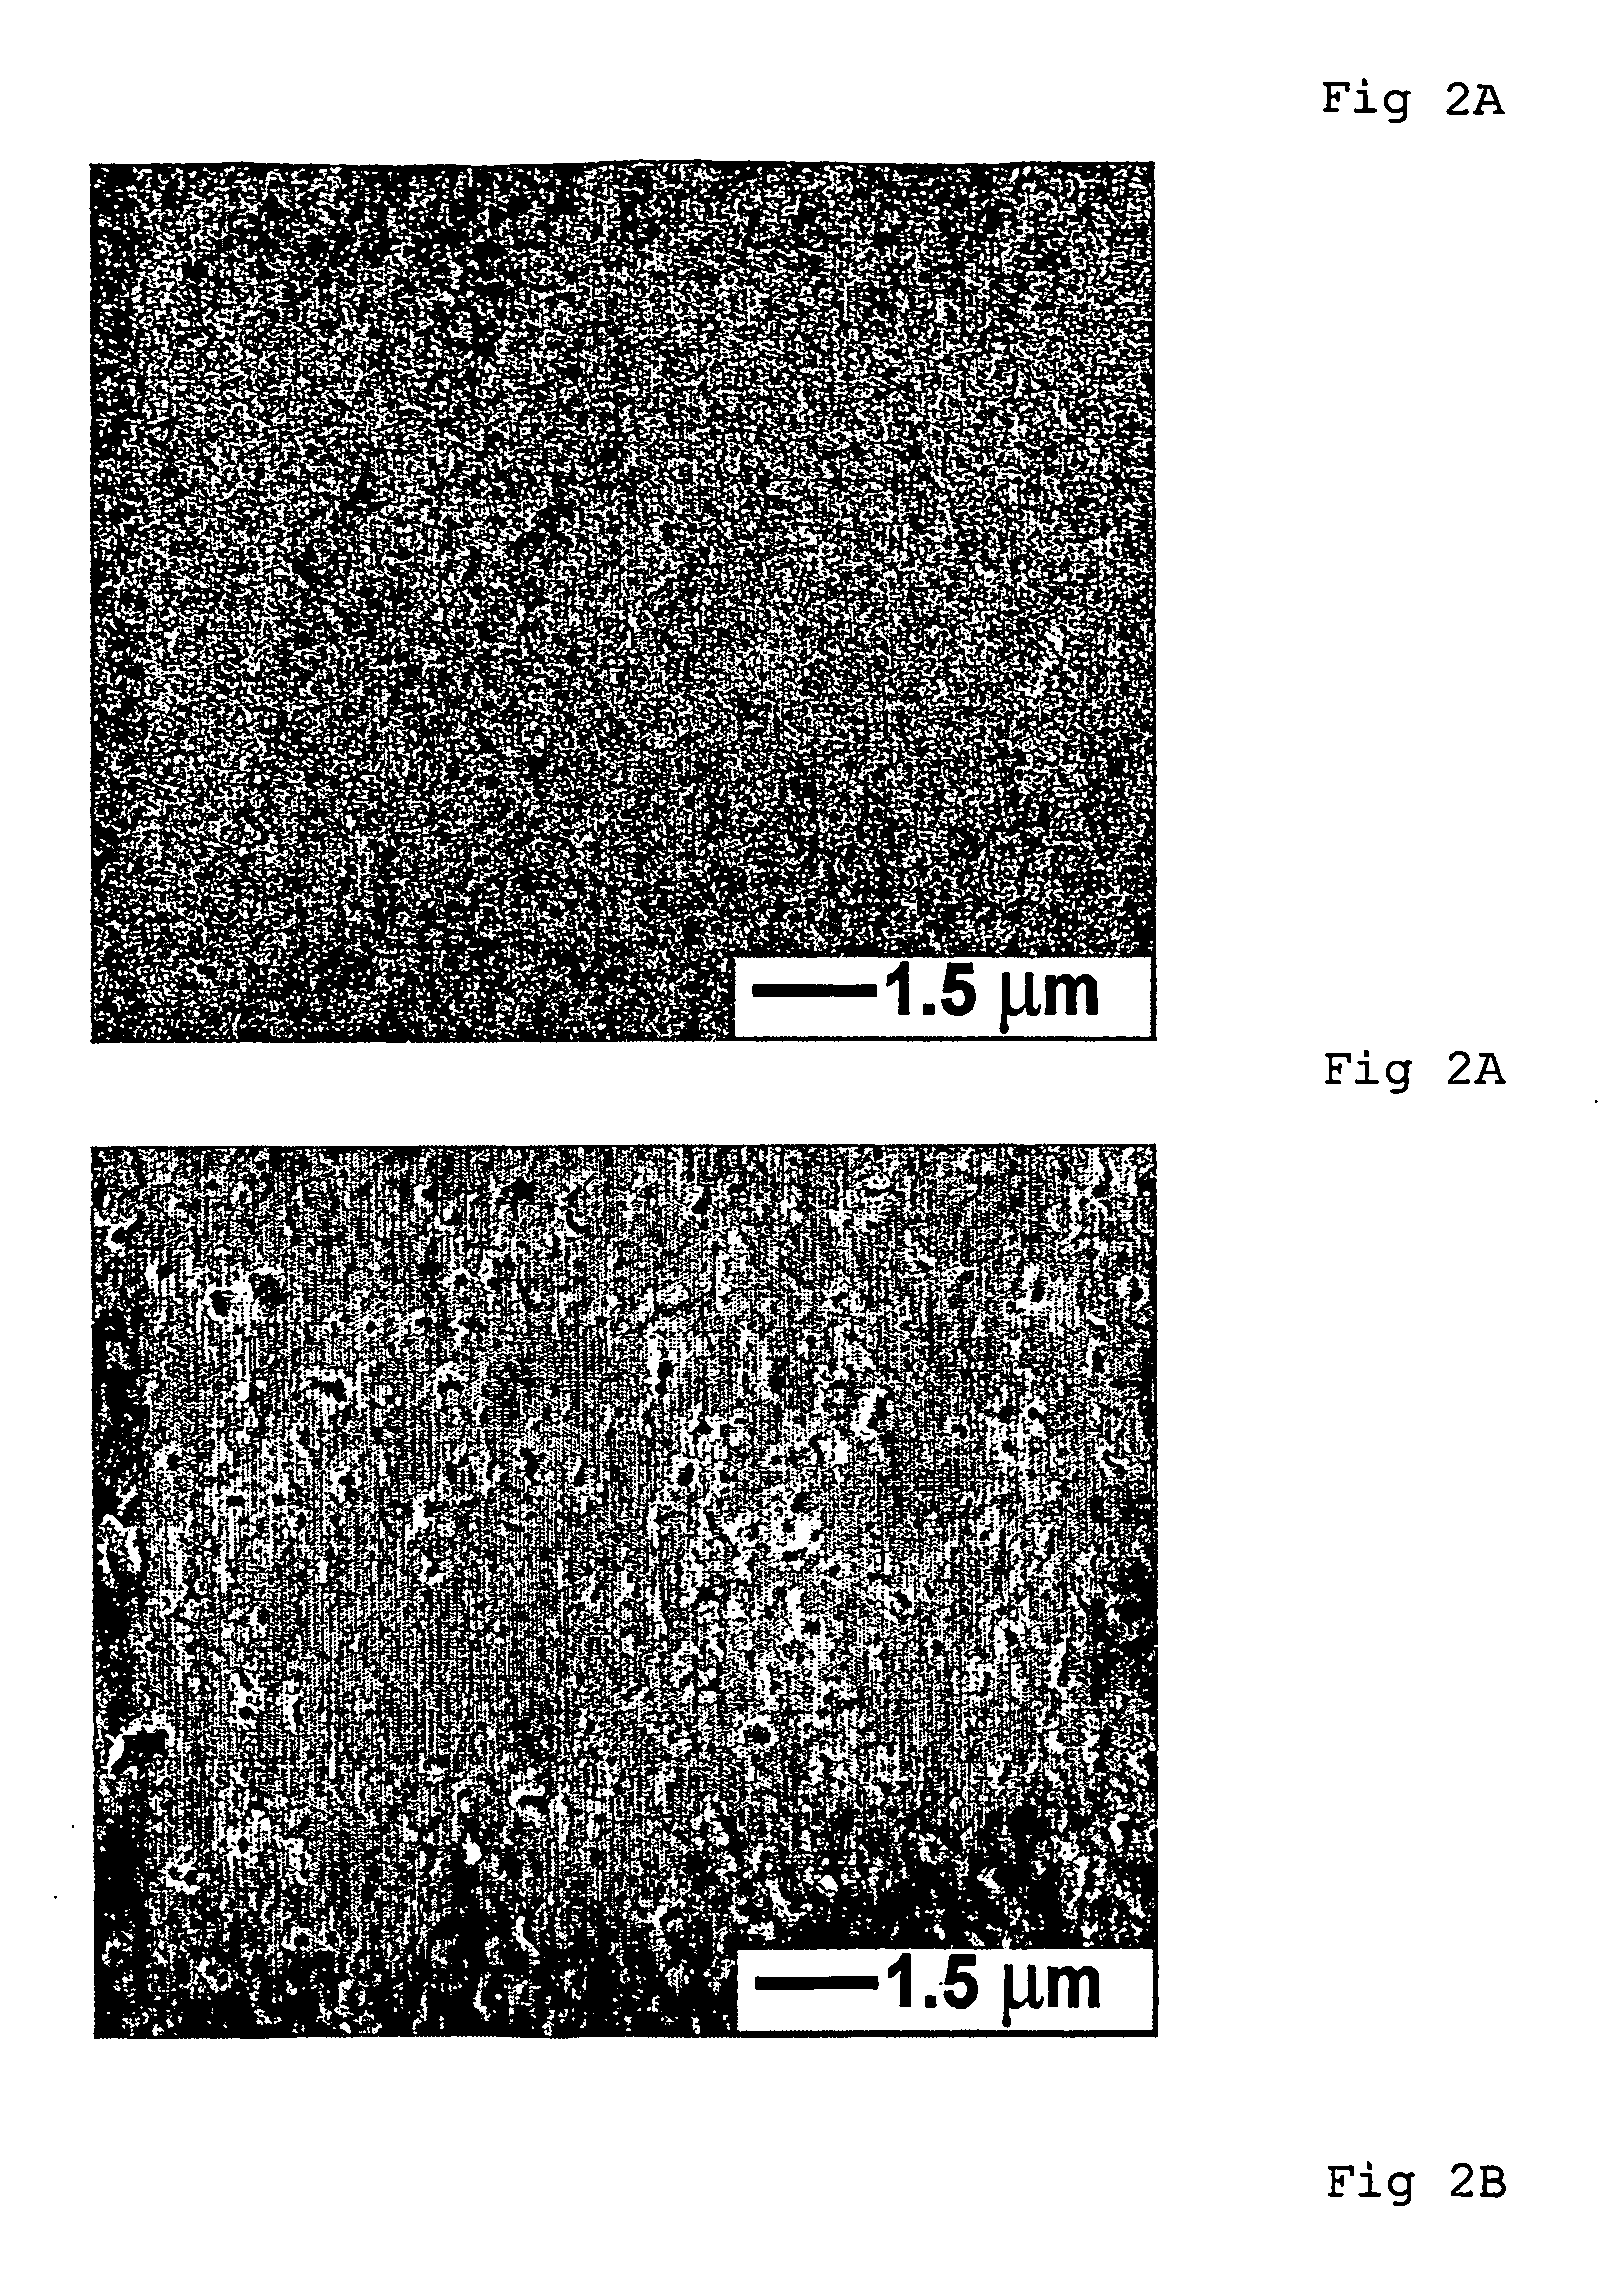 Porous molecularly imprinted polymer membranes